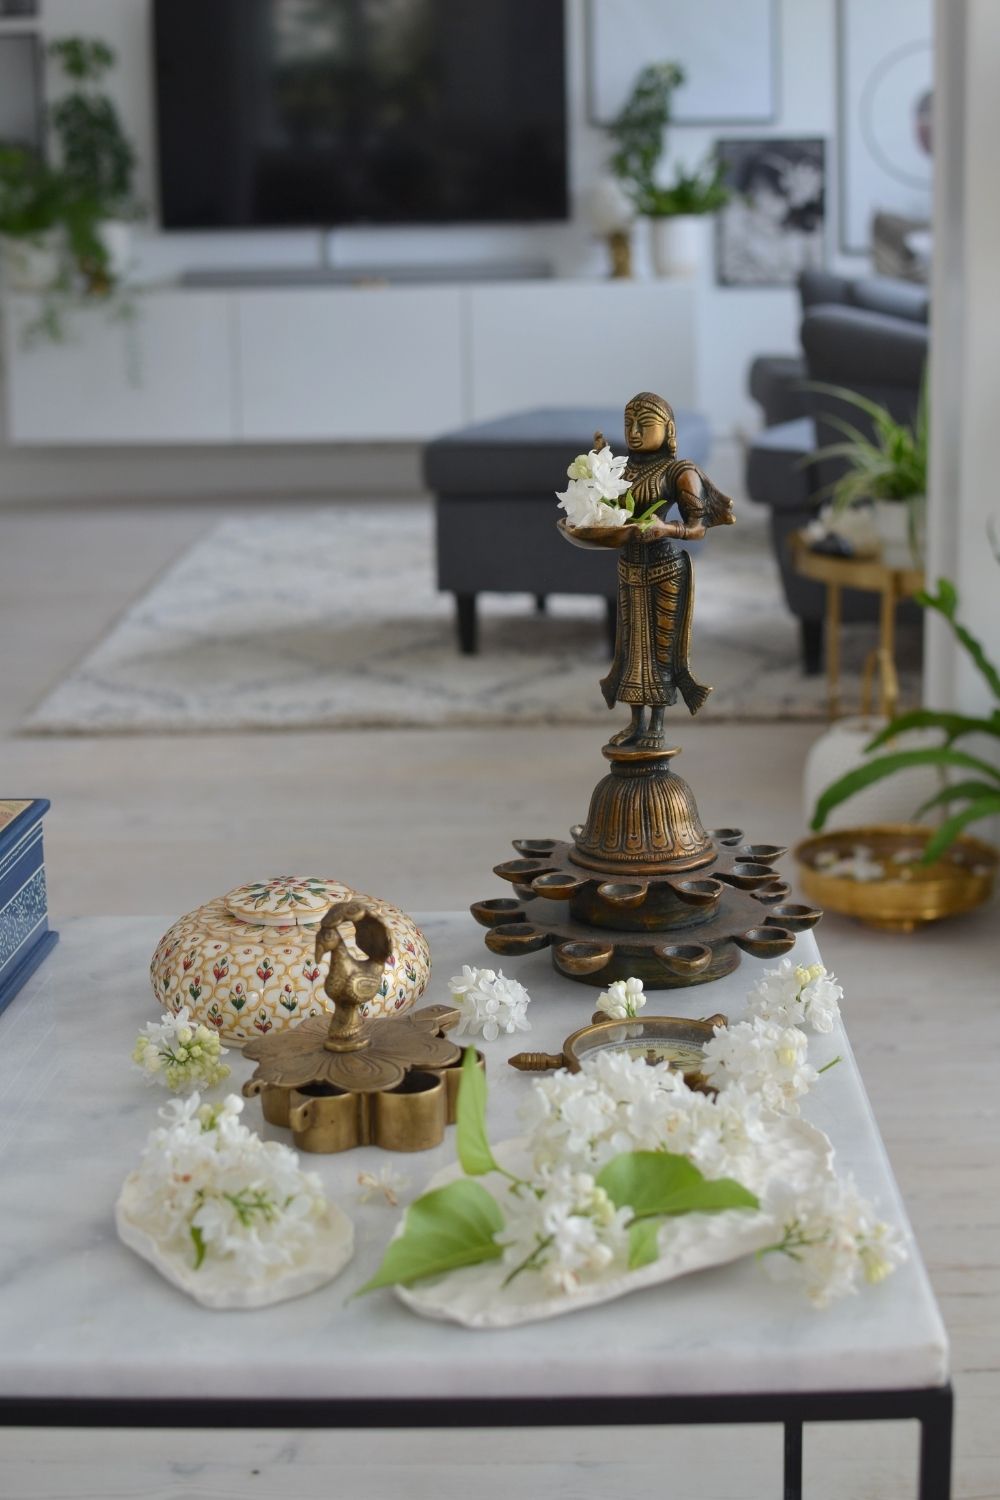 The centerpiece decor ideas for living room table | Naina's Scandi-Indian minimal home